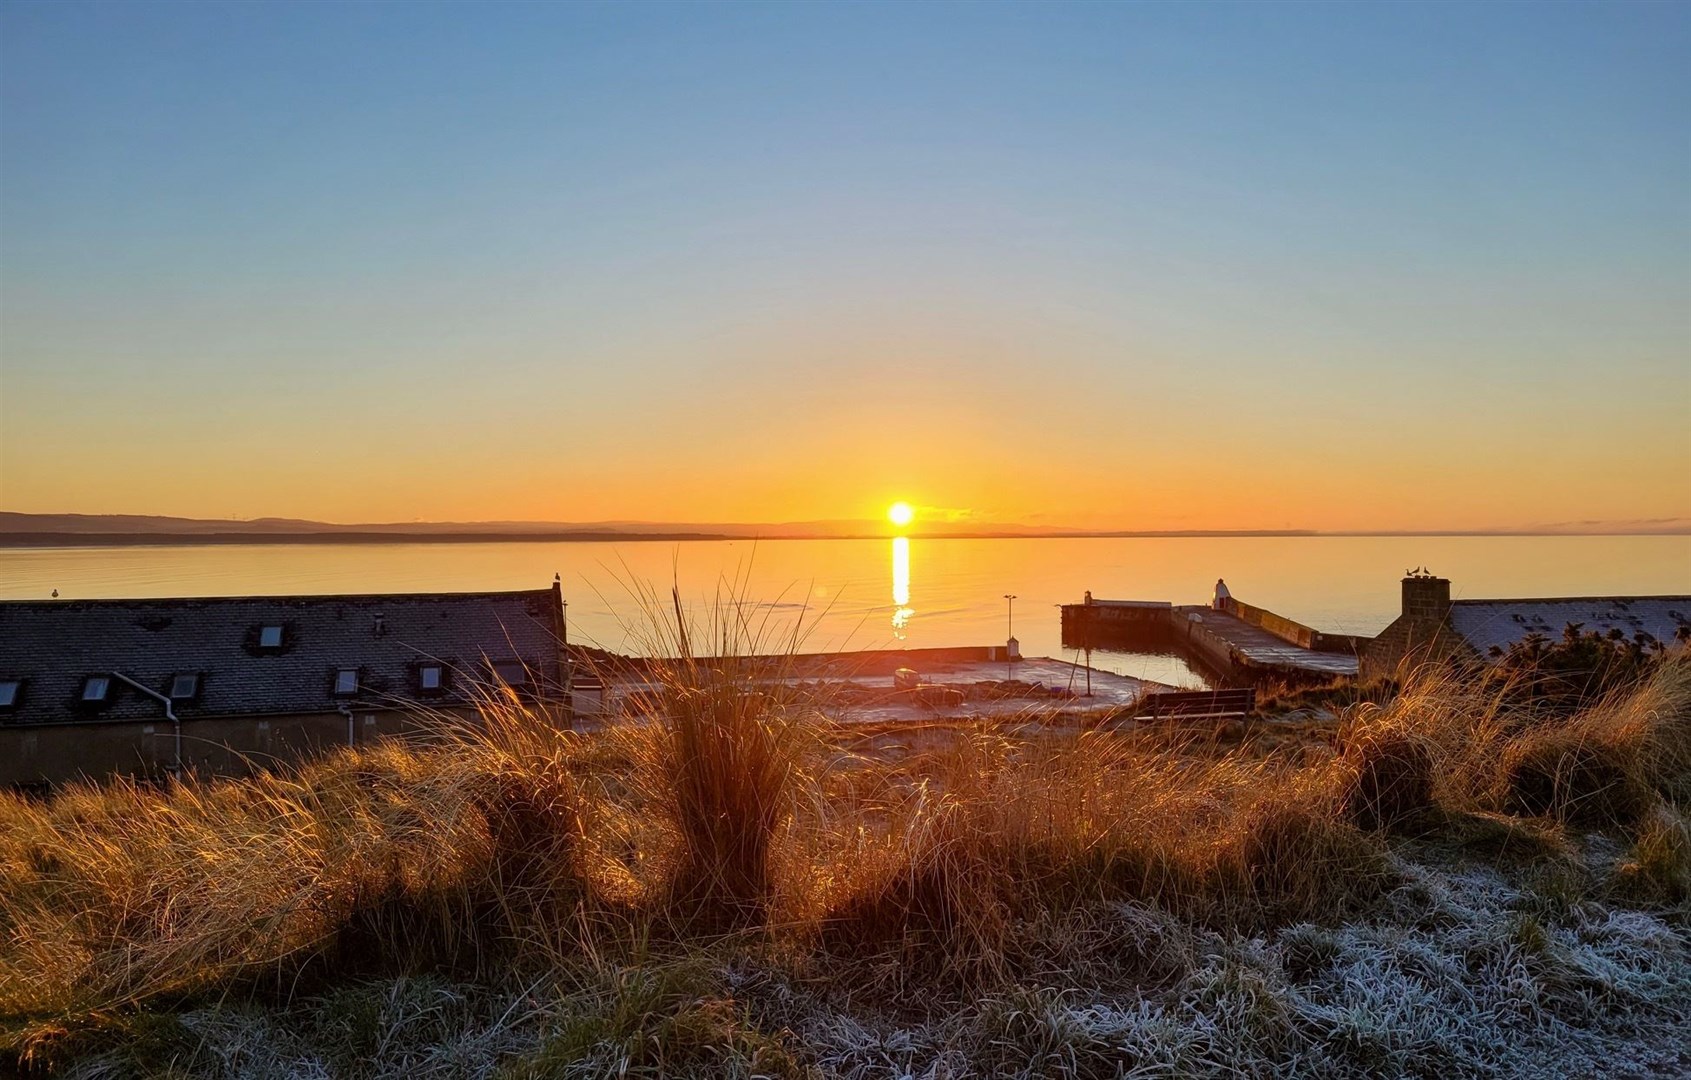 Hazel Thomson took this picture in Burghead.